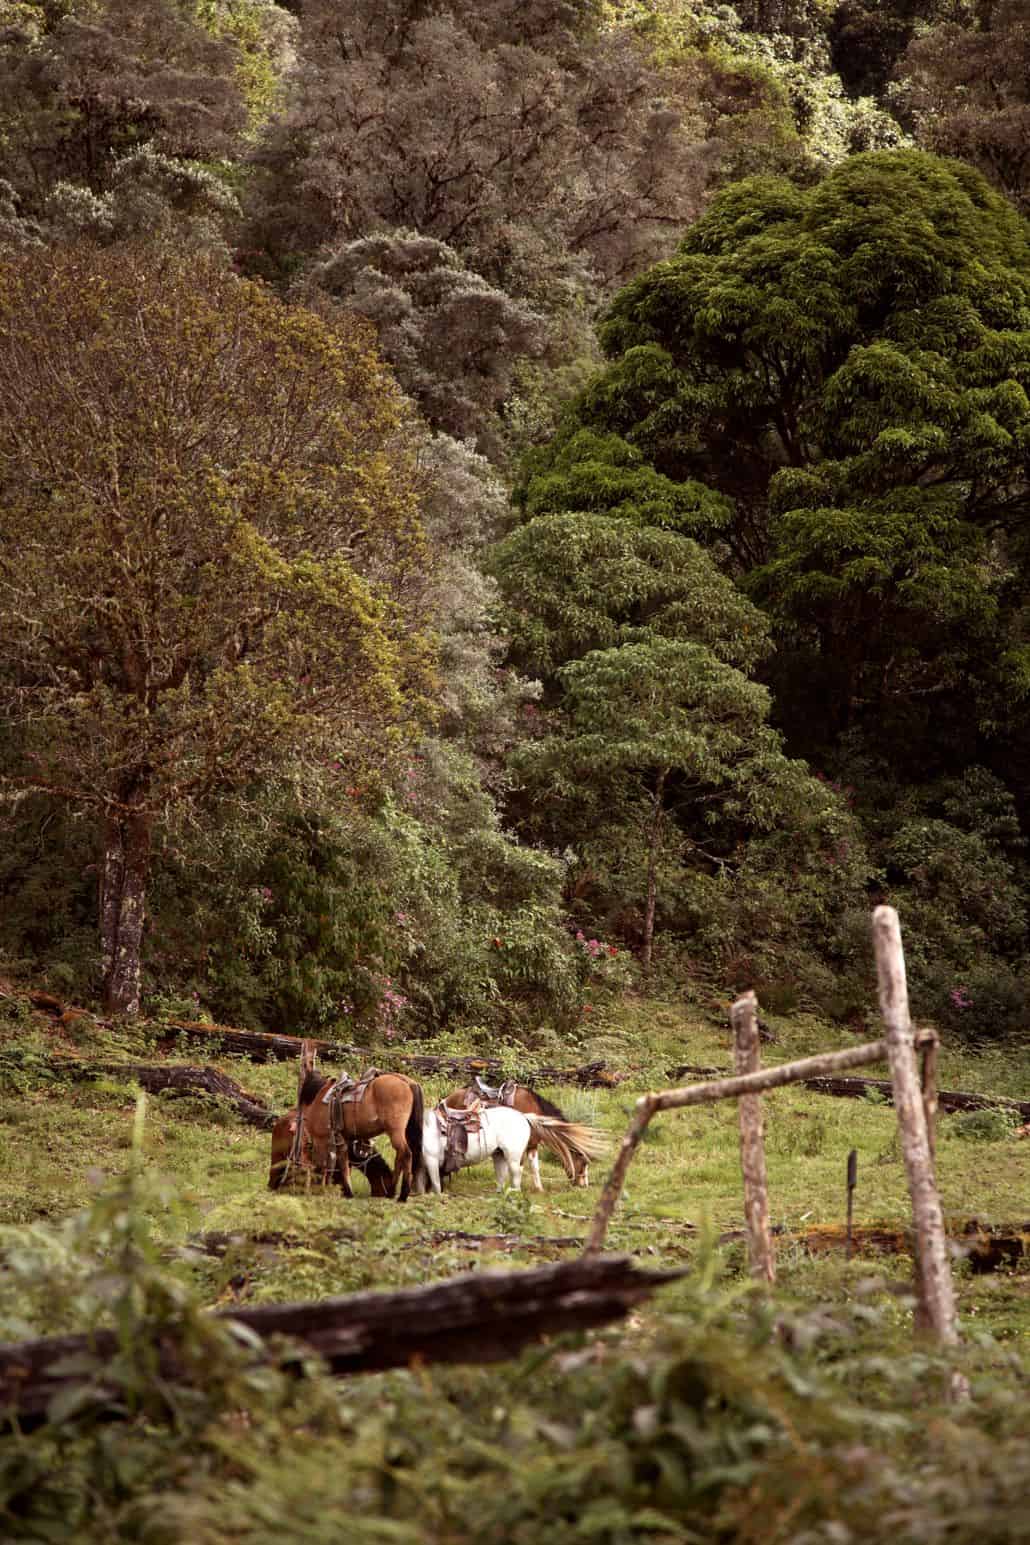 Horses grazing in a field, old wooden fence, thick forest background, Costa Rican destination wedding photographer